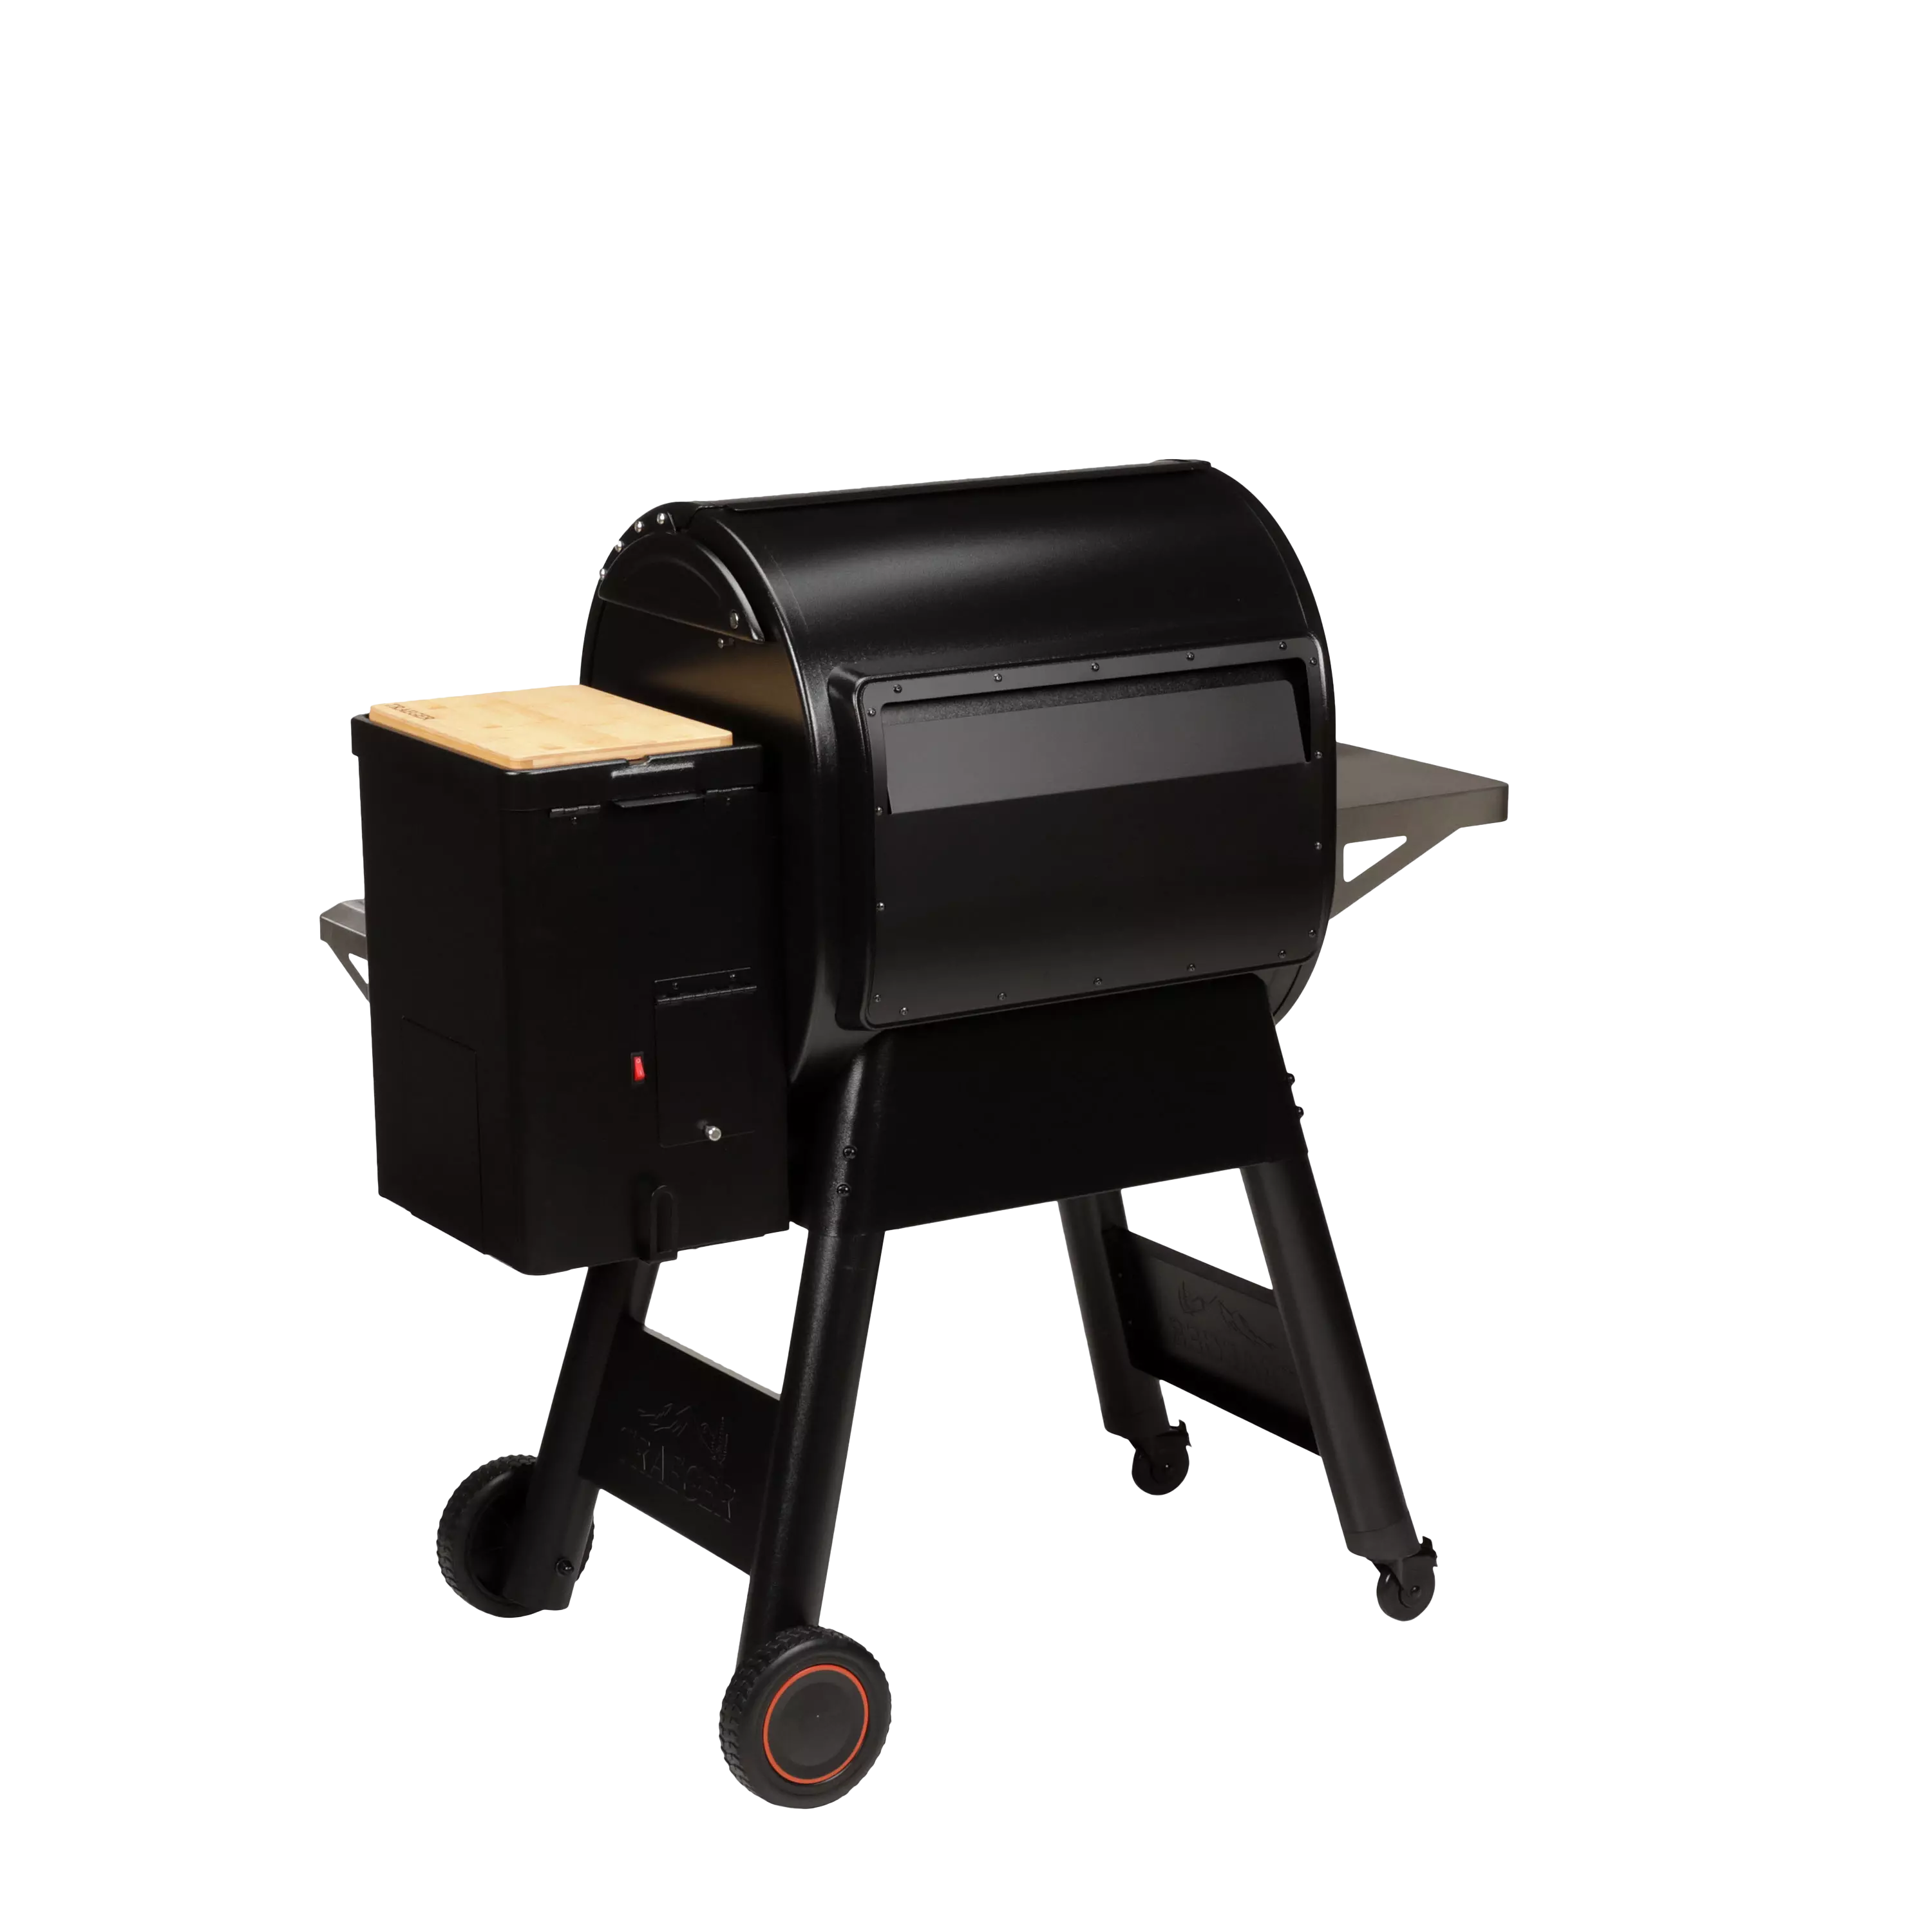 Timberline 850/1300 Stove King Pellet Stove The Traeger Pro 575/780 Non Angled & Ironwood 650/850 KIT0257 Grill Detachable Power Cord 